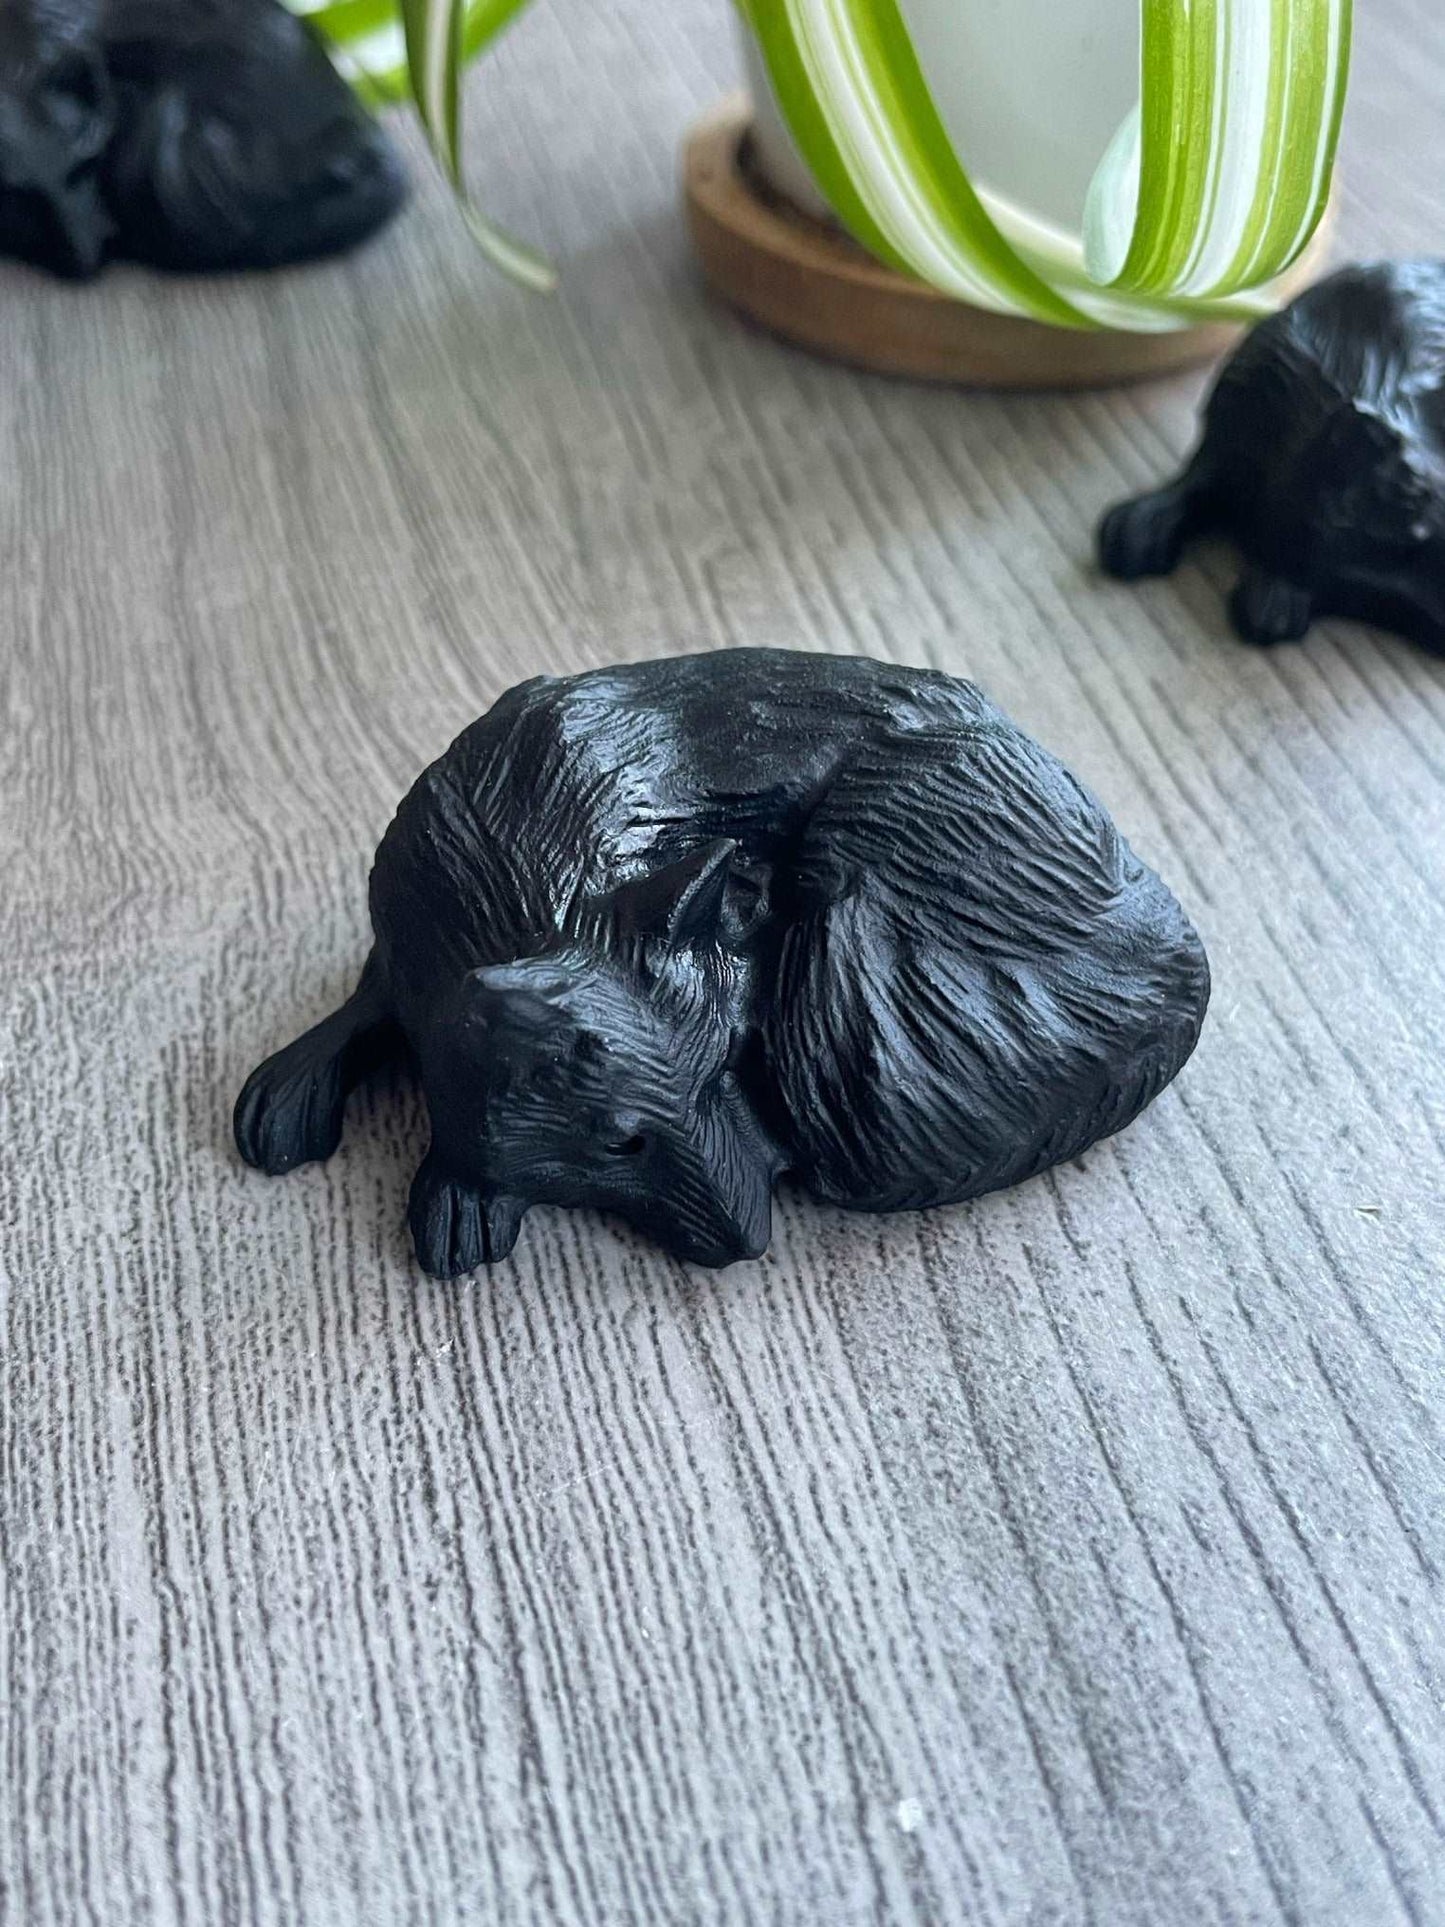 Pictured is a sleeping wolf carved out of black obsidian. Pictured is a sleeping fox carved out of black obsidian.